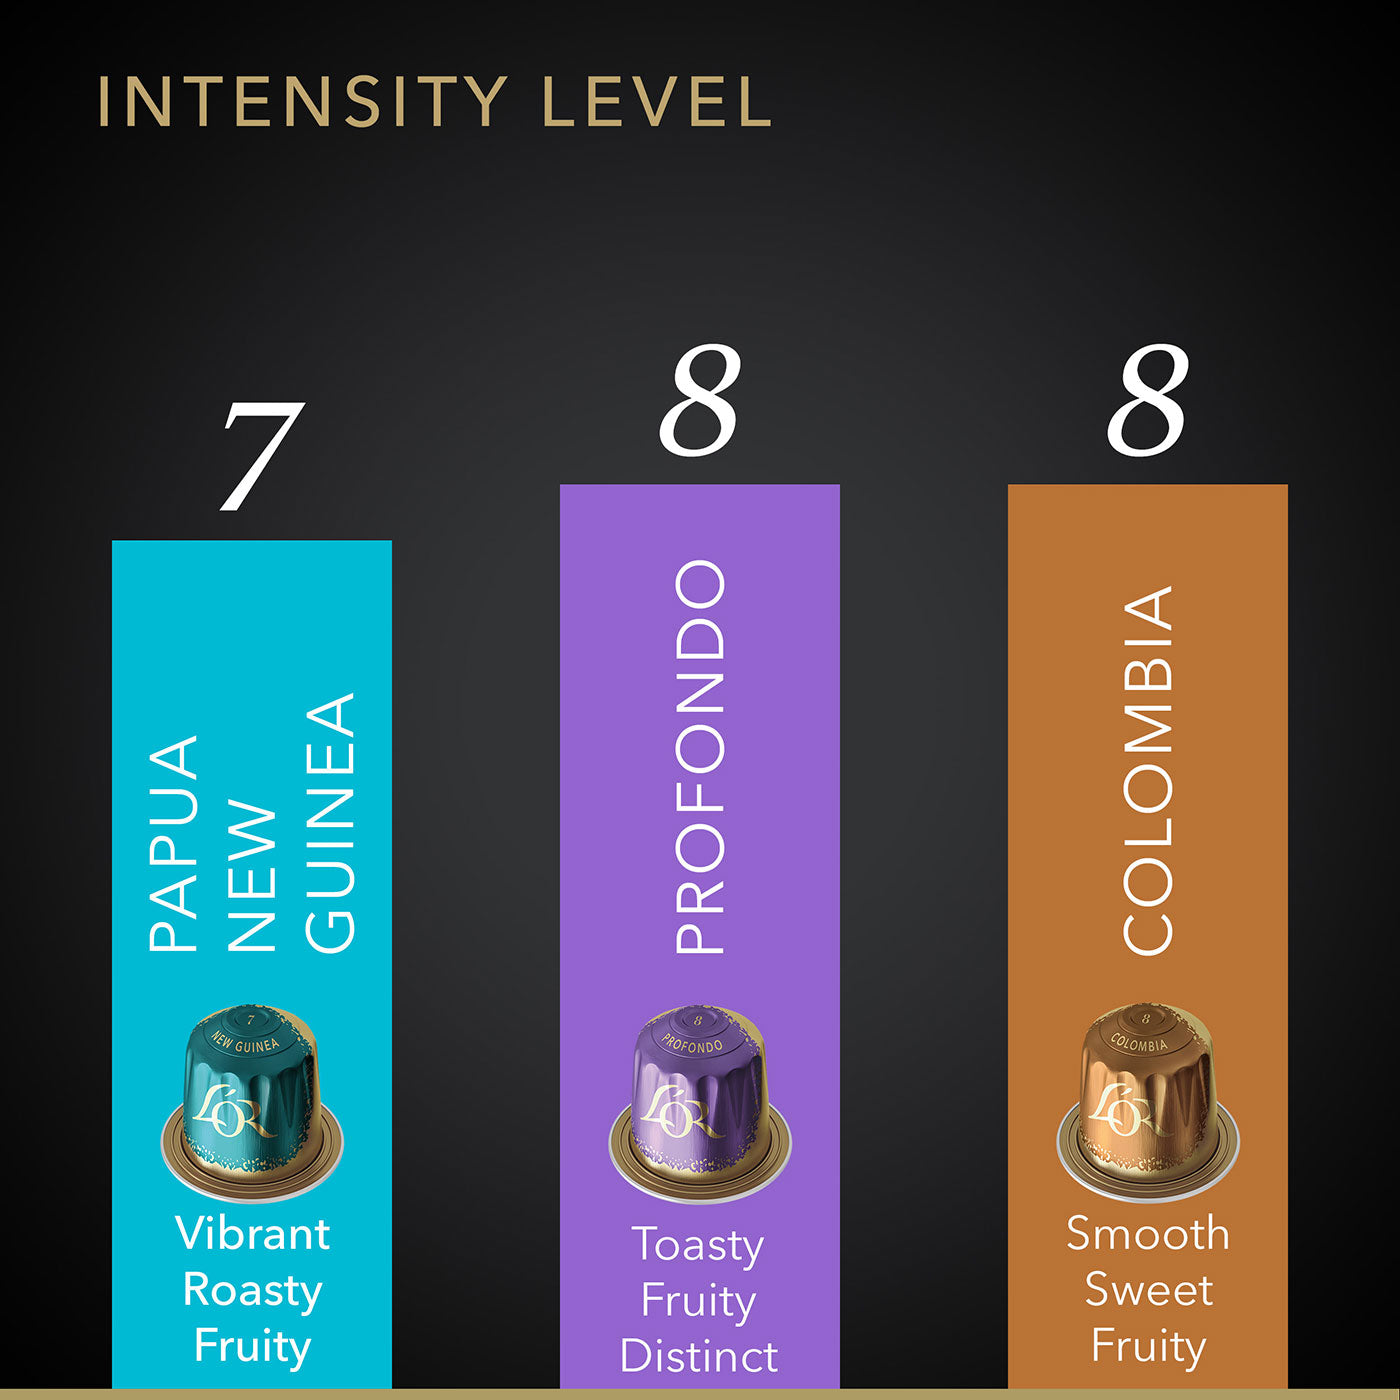 Image of intensity levels included. 